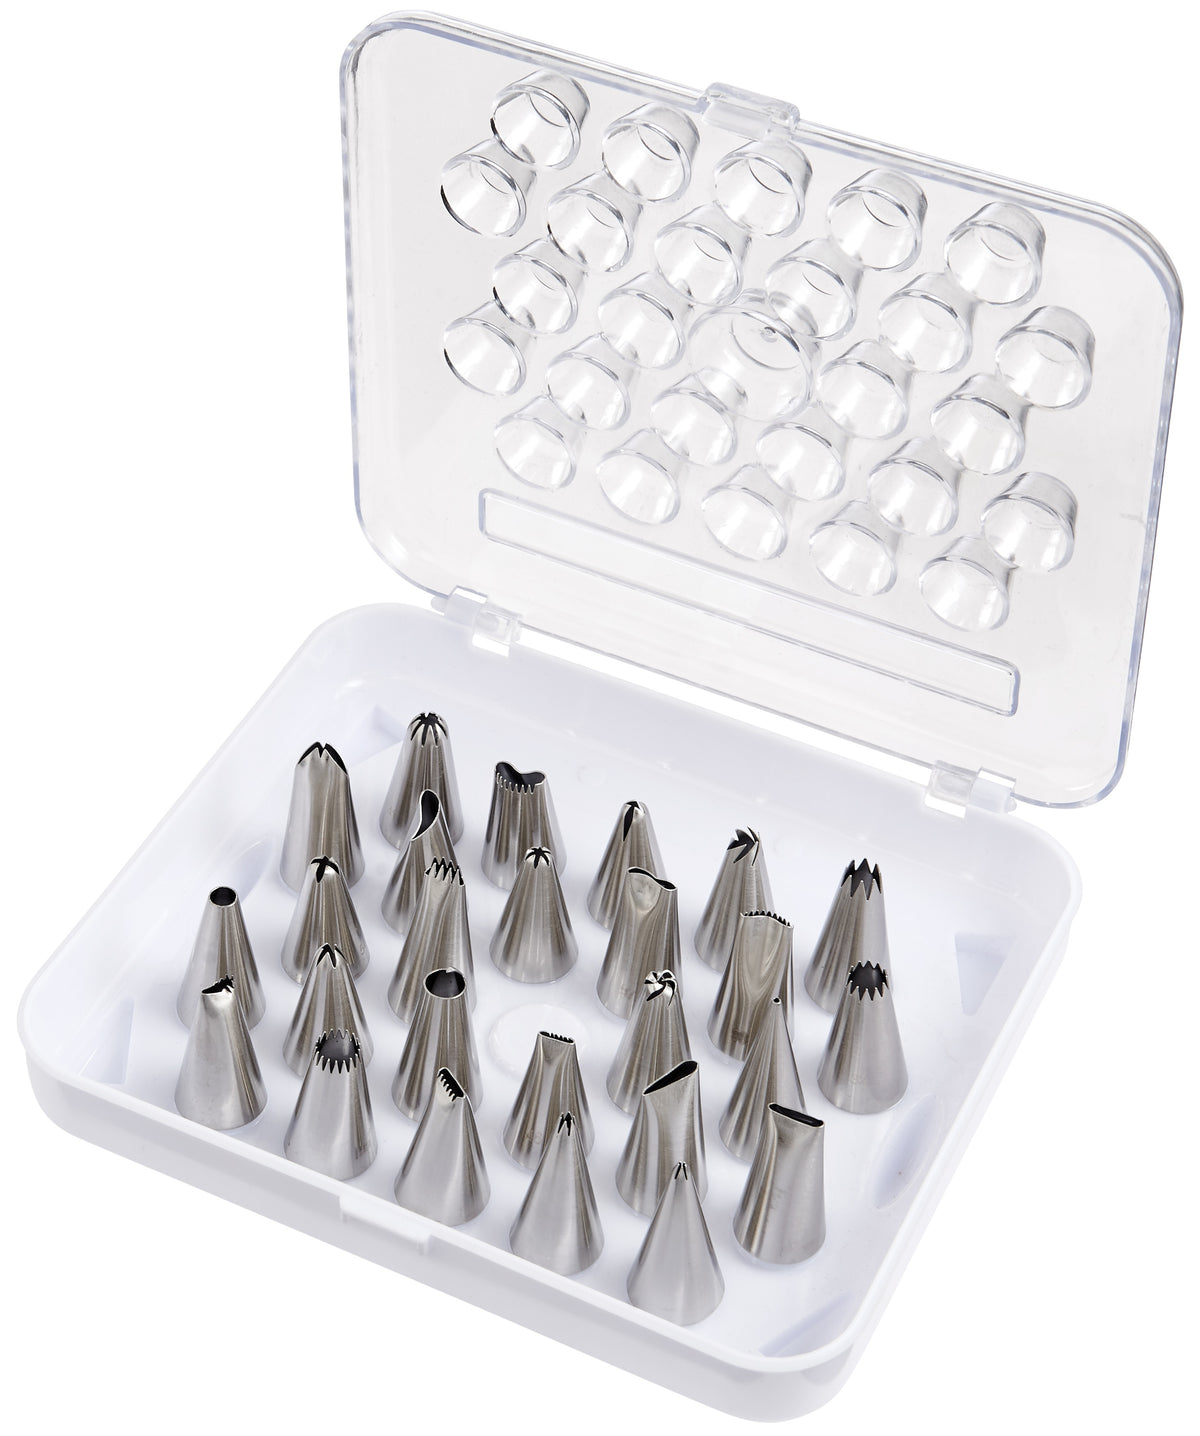 Mrs. Anderson's 38024 Pastry Decorating Set, Silver